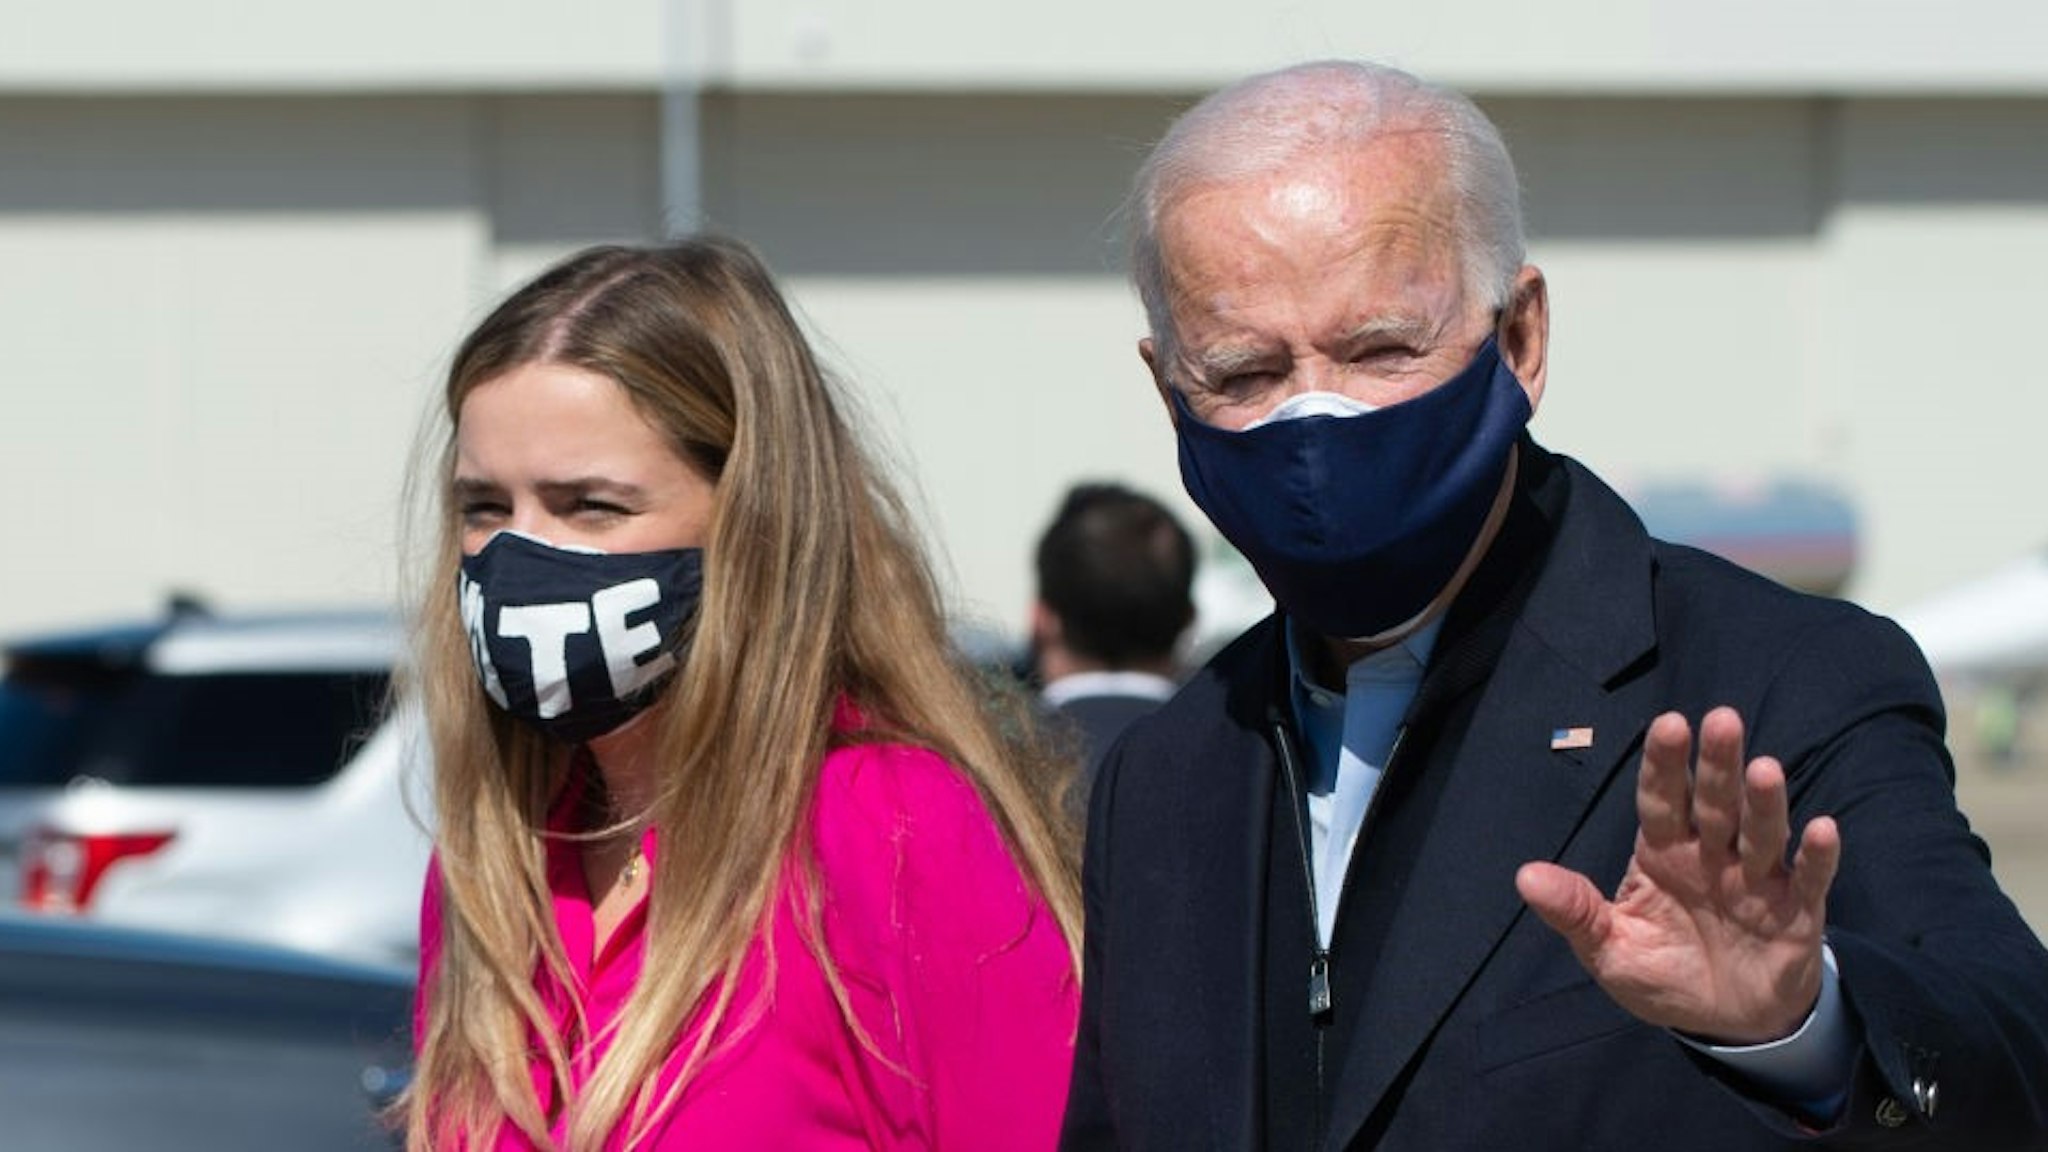 Democratic presidential nominee and former Vice President Joe Biden stands next to his granddaughter Finnegan after landing at the Raleigh-Durham International Airport on October 18, 2020 in Durham, North Carolina. - President Donald Trump and rival Joe Biden hit the ground Sunday in the swing states that will decide the US election, as the campaign turns increasingly vicious 16 days before voting. Trump, scrambling to make up lost ground, is on a furious multi-state barnstorming tour hopping from Nevada to California and then back to Nevada for a day of rallies and fundraising. (Photo by ROBERTO SCHMIDT / AFP) (Photo by